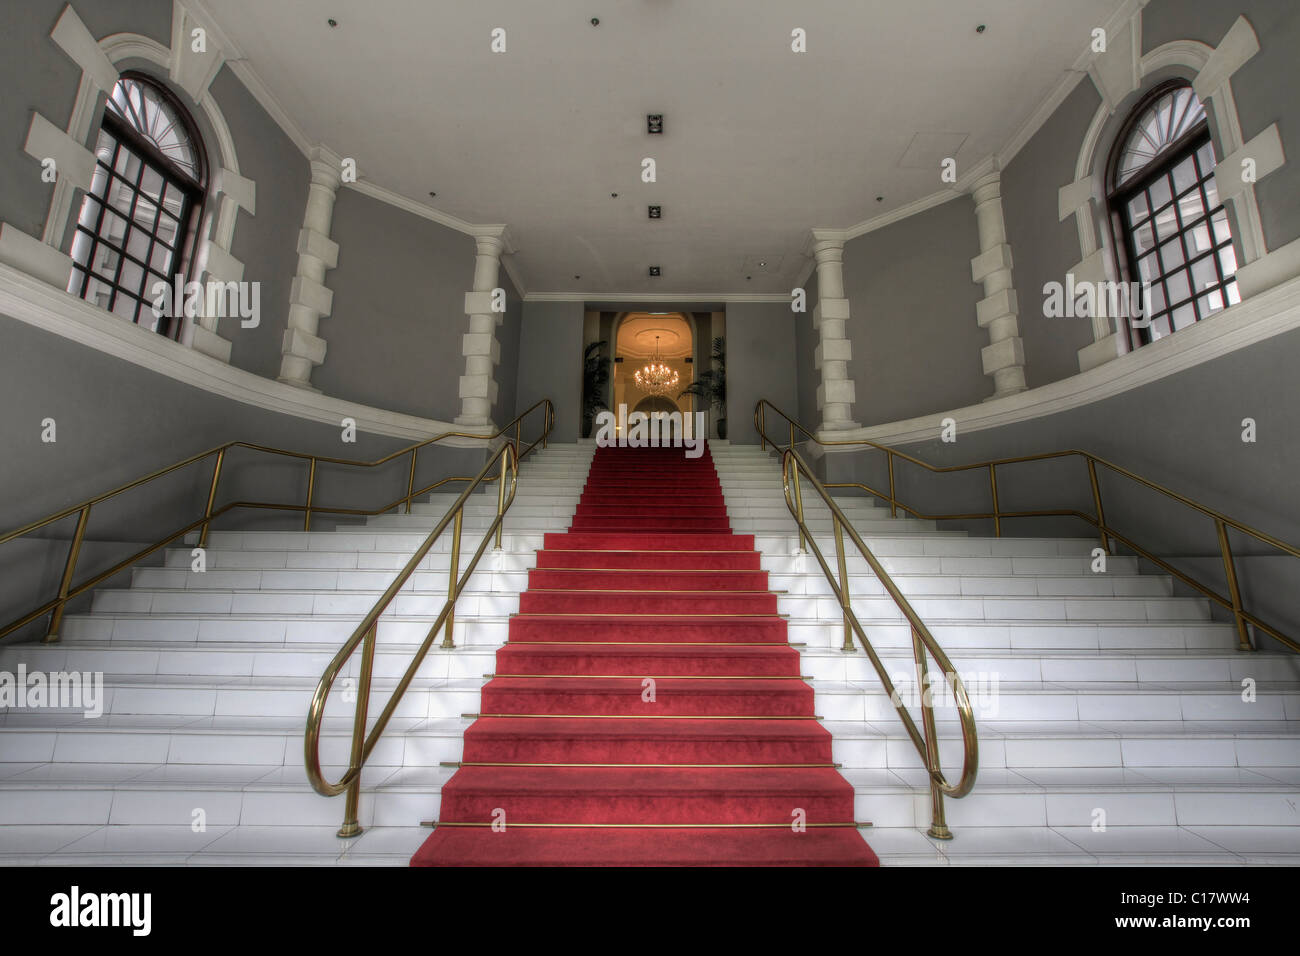 Grand Entrance Staircase to Historic Building Lobby Stock Photo